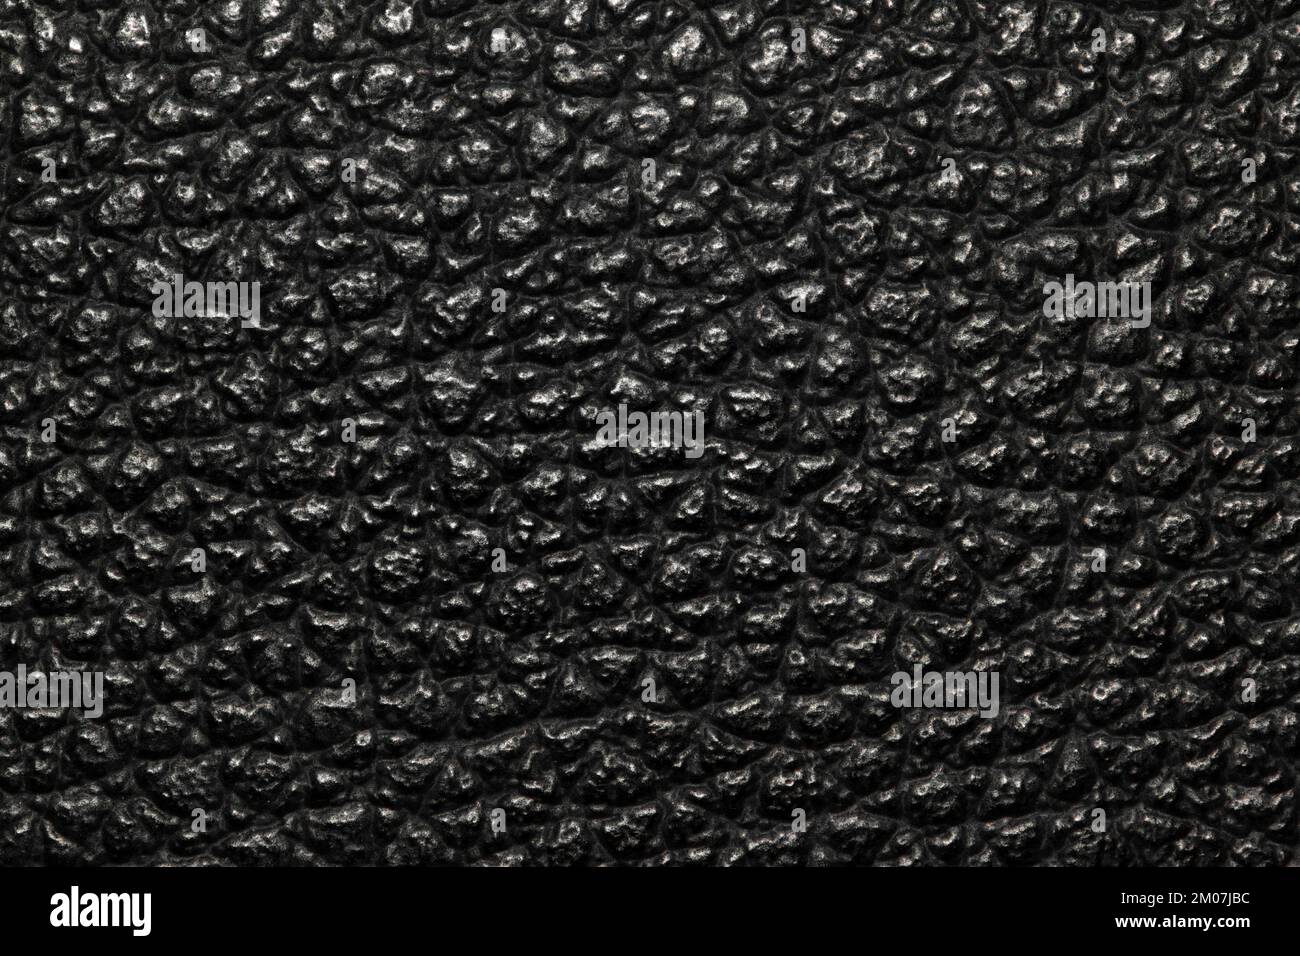 Dark black bumpy textured background image with highlights. Rough leather or animal skin appearance. Stock Photo